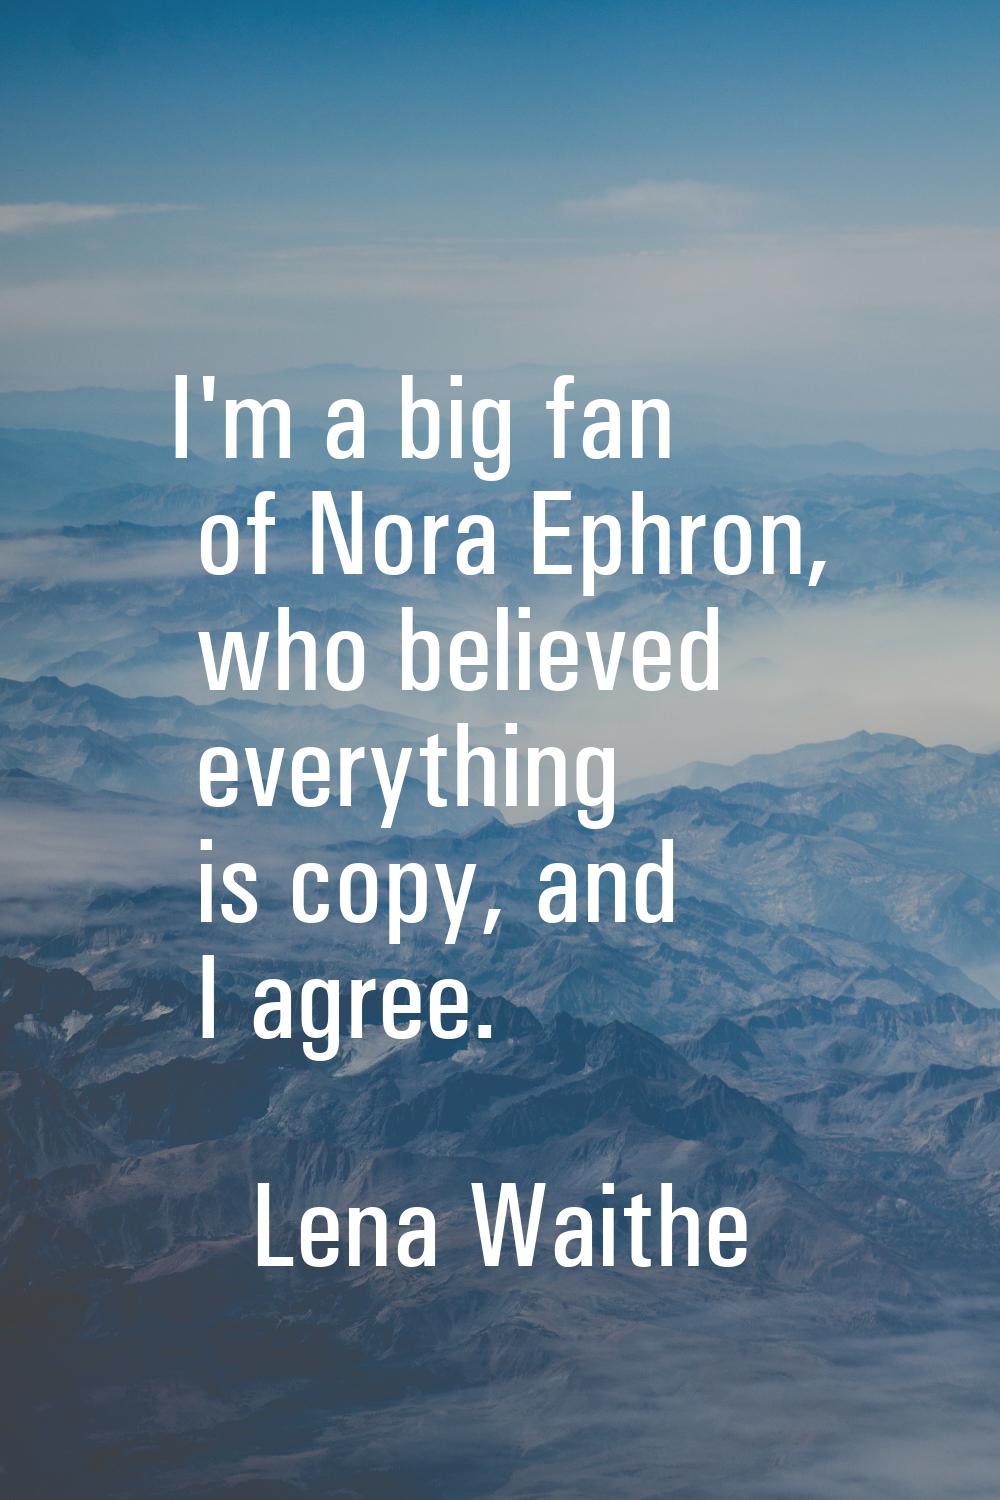 I'm a big fan of Nora Ephron, who believed everything is copy, and I agree.